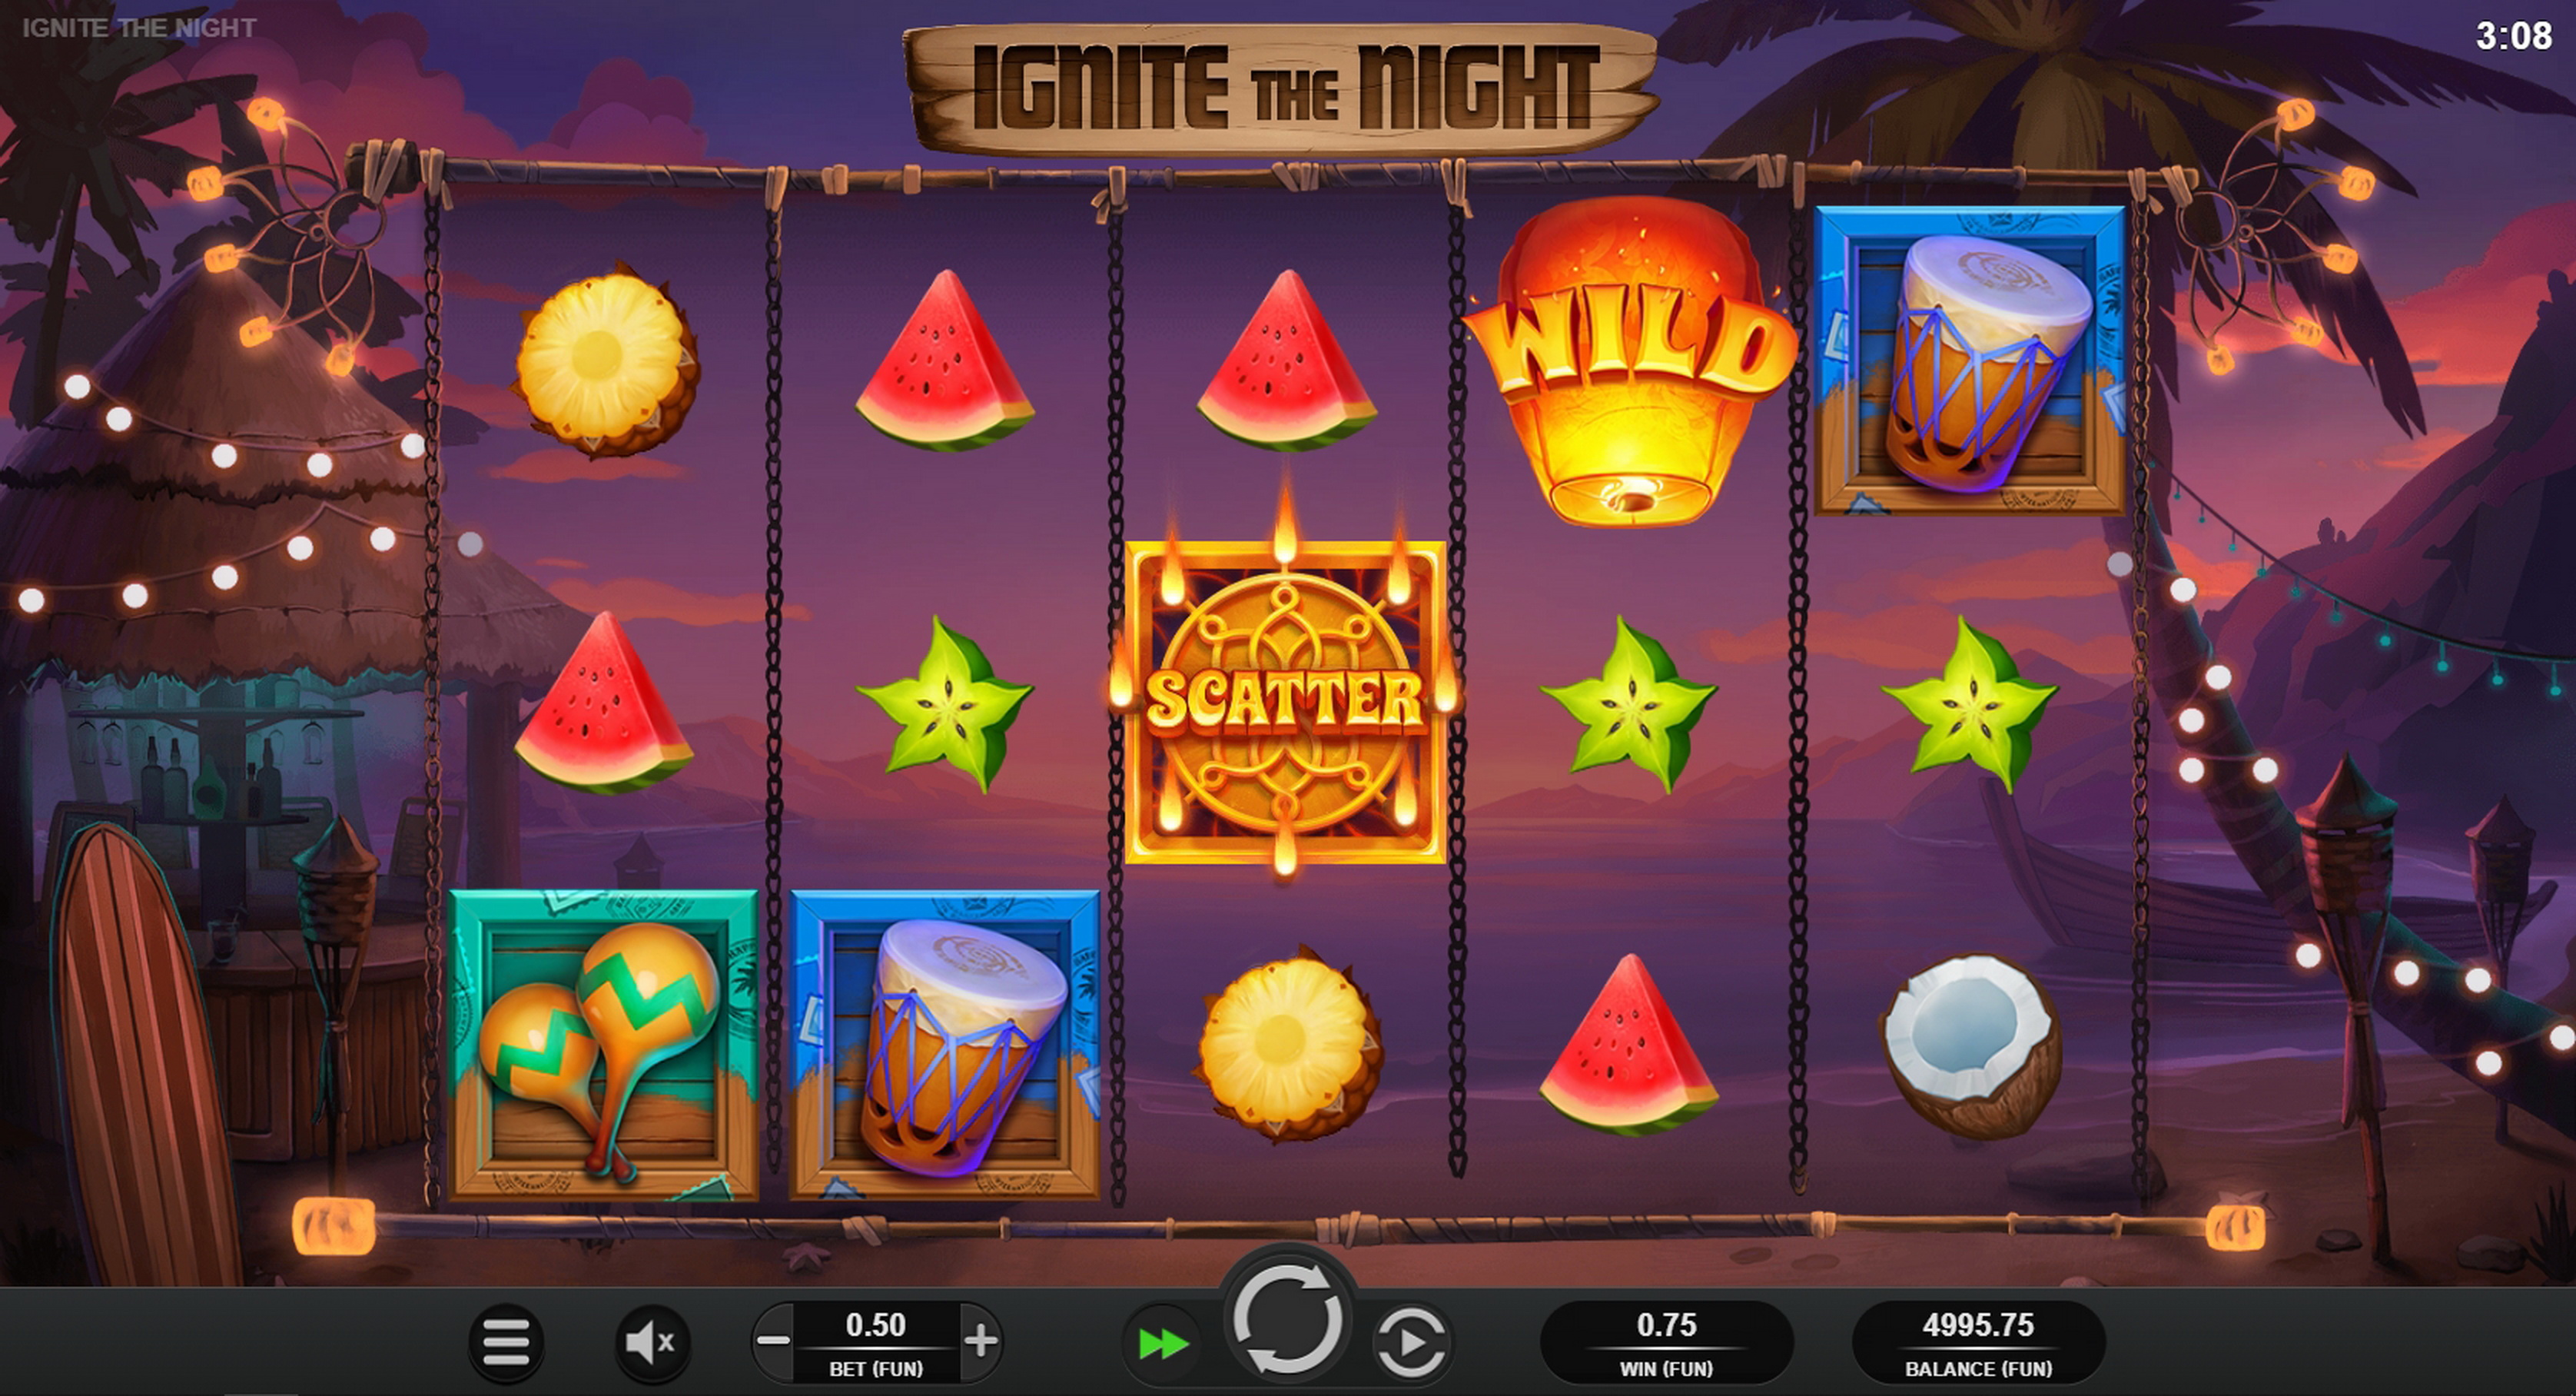 Win Money in Ignite The Night Free Slot Game by Relax Gaming